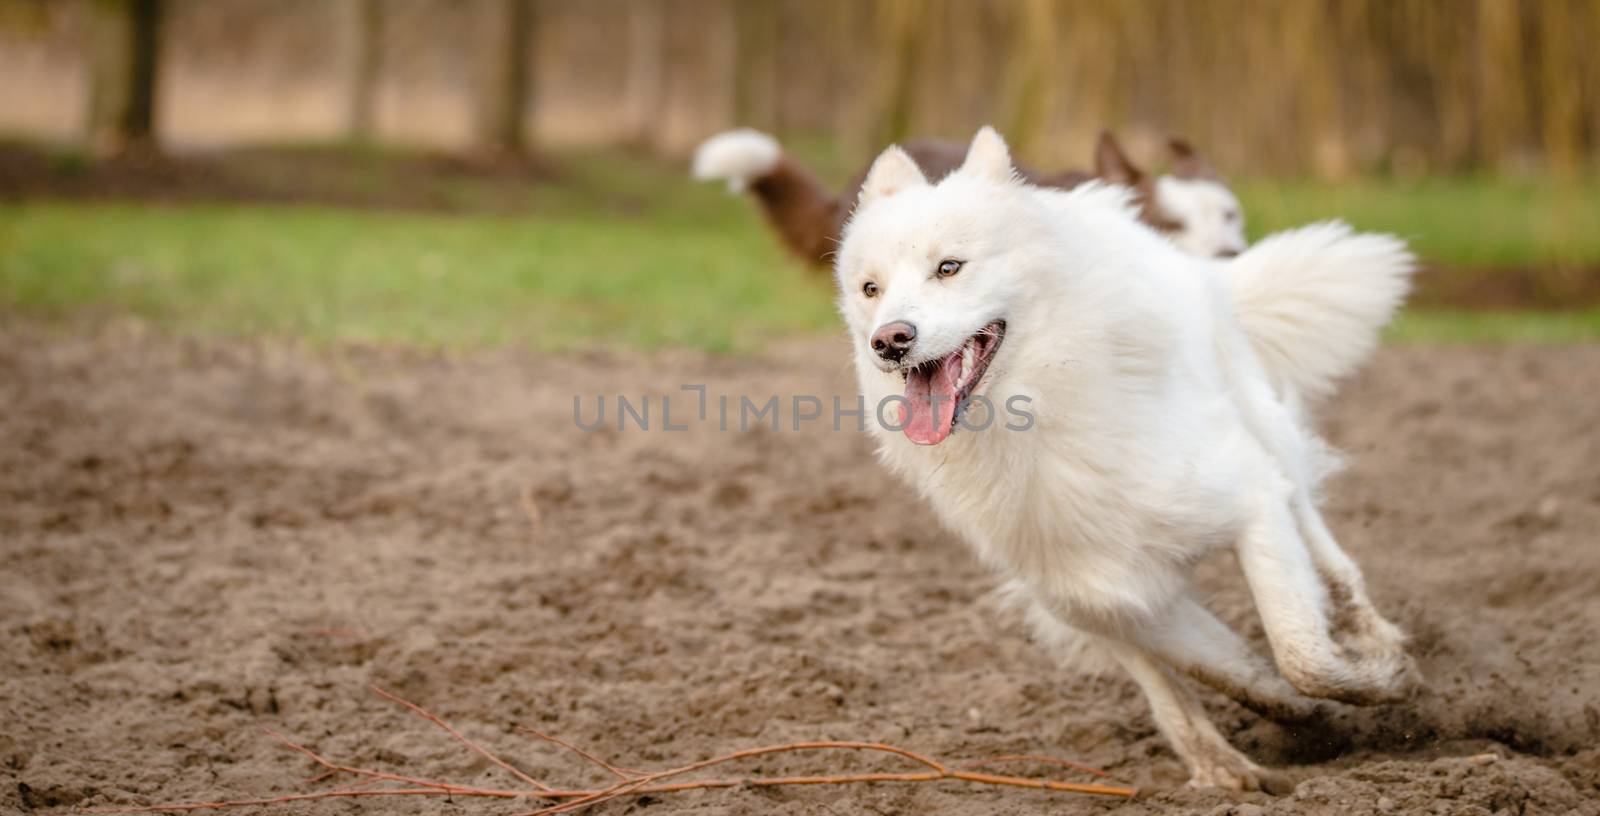 Cute, fluffy white Samoyed dog running and playing at the dog park by Pendleton